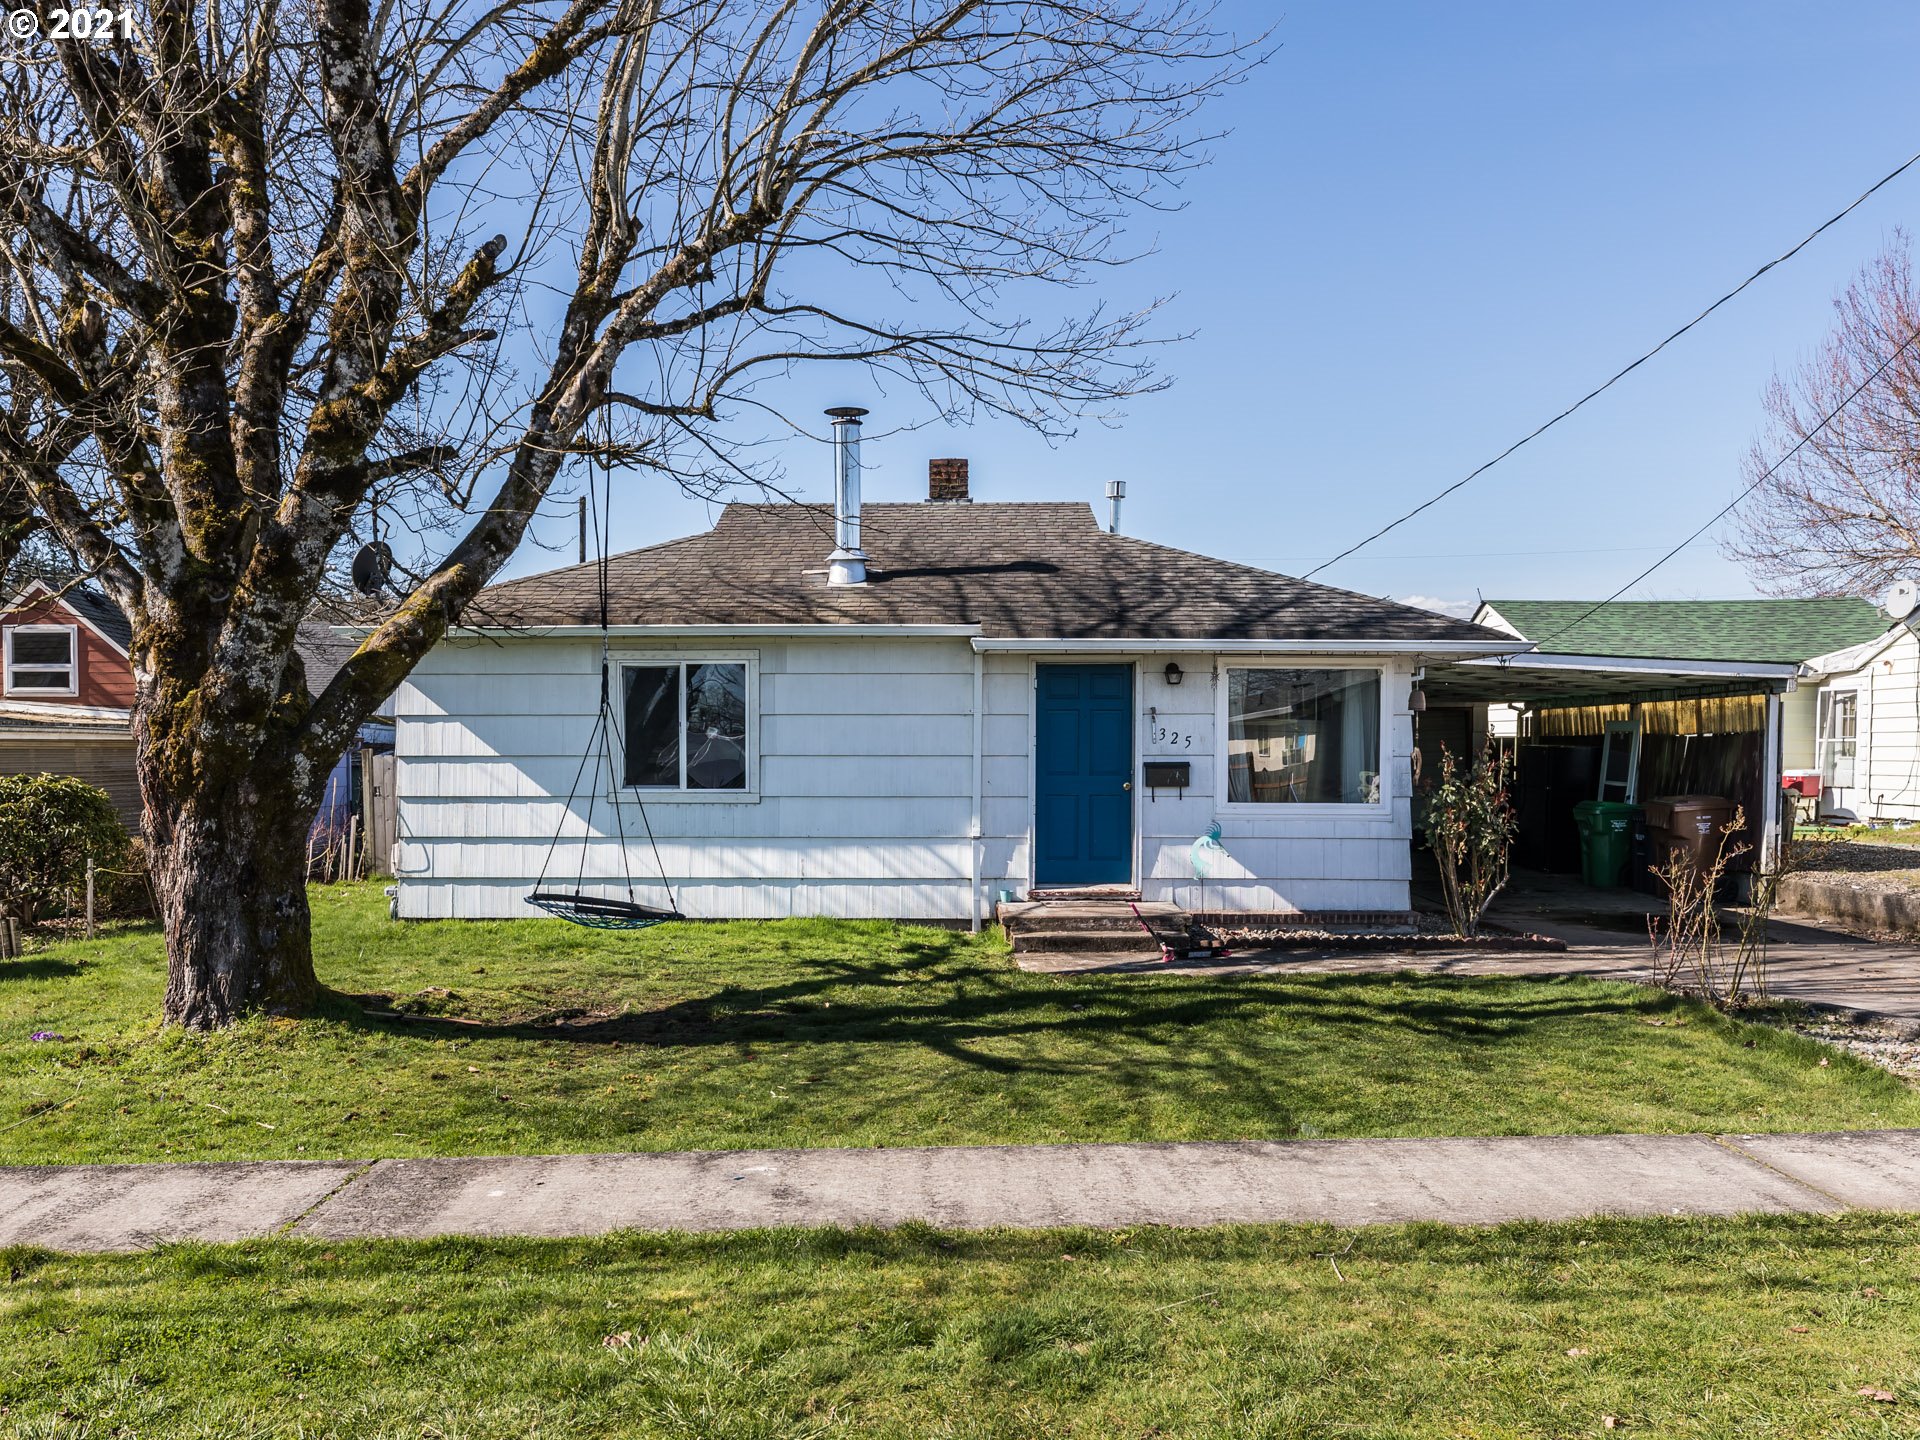 325 S 19TH ST (1 of 2)